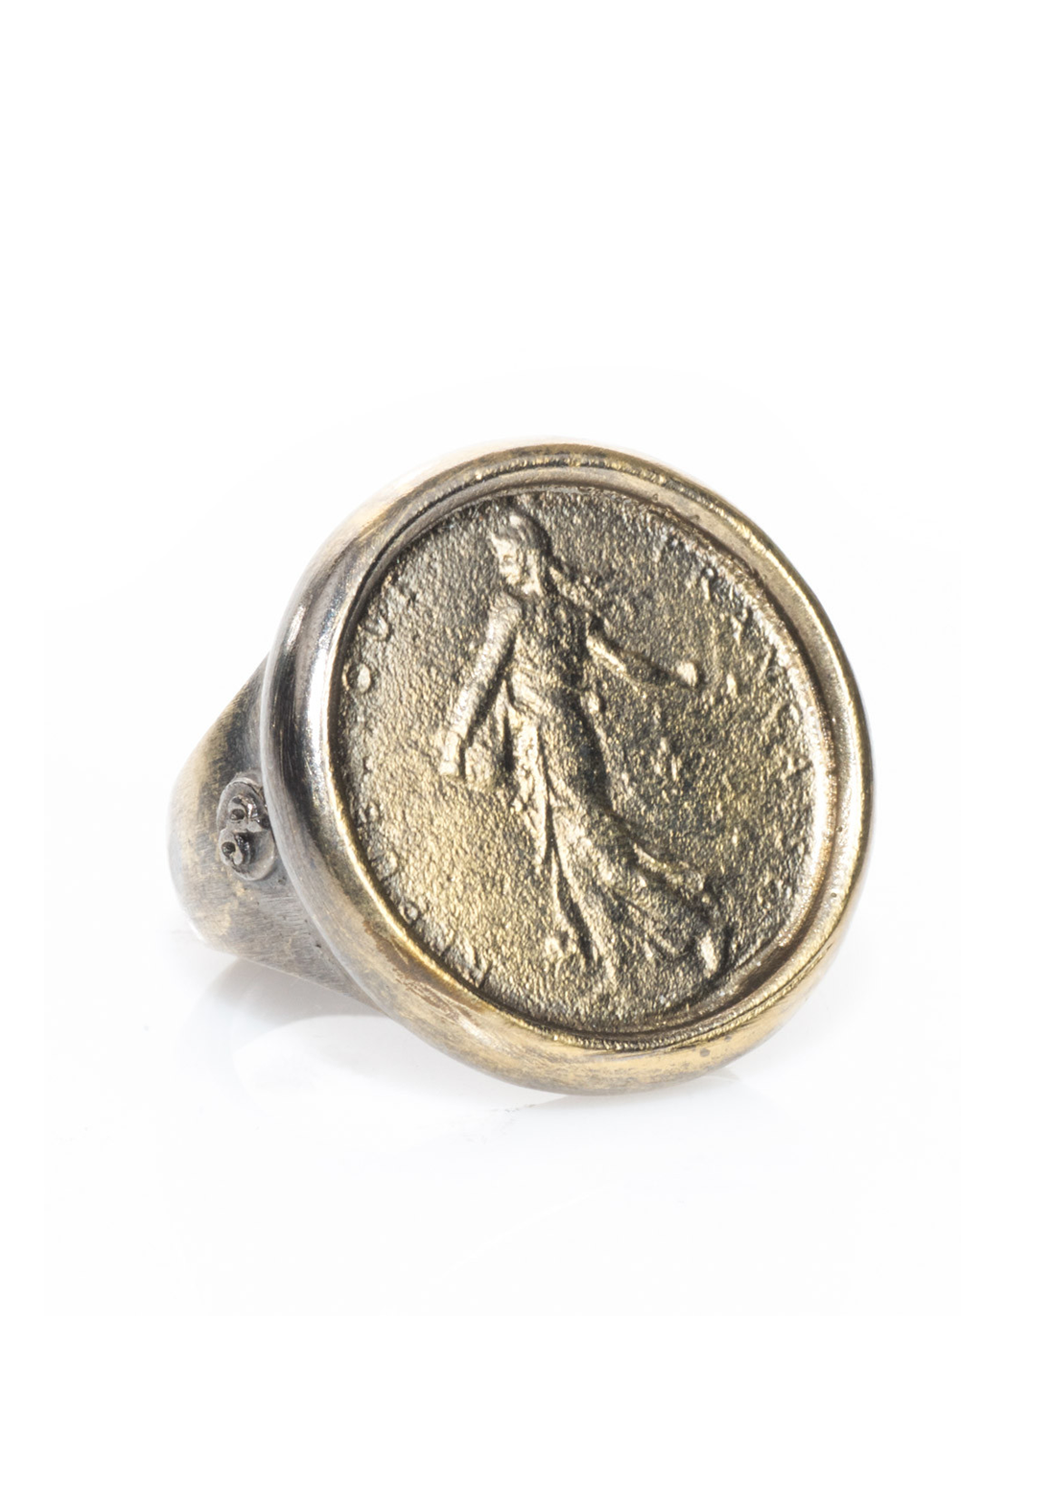 Dominique Cohen 18k Blackened Gold Goddess Coin Ring | OsterJewelers.com